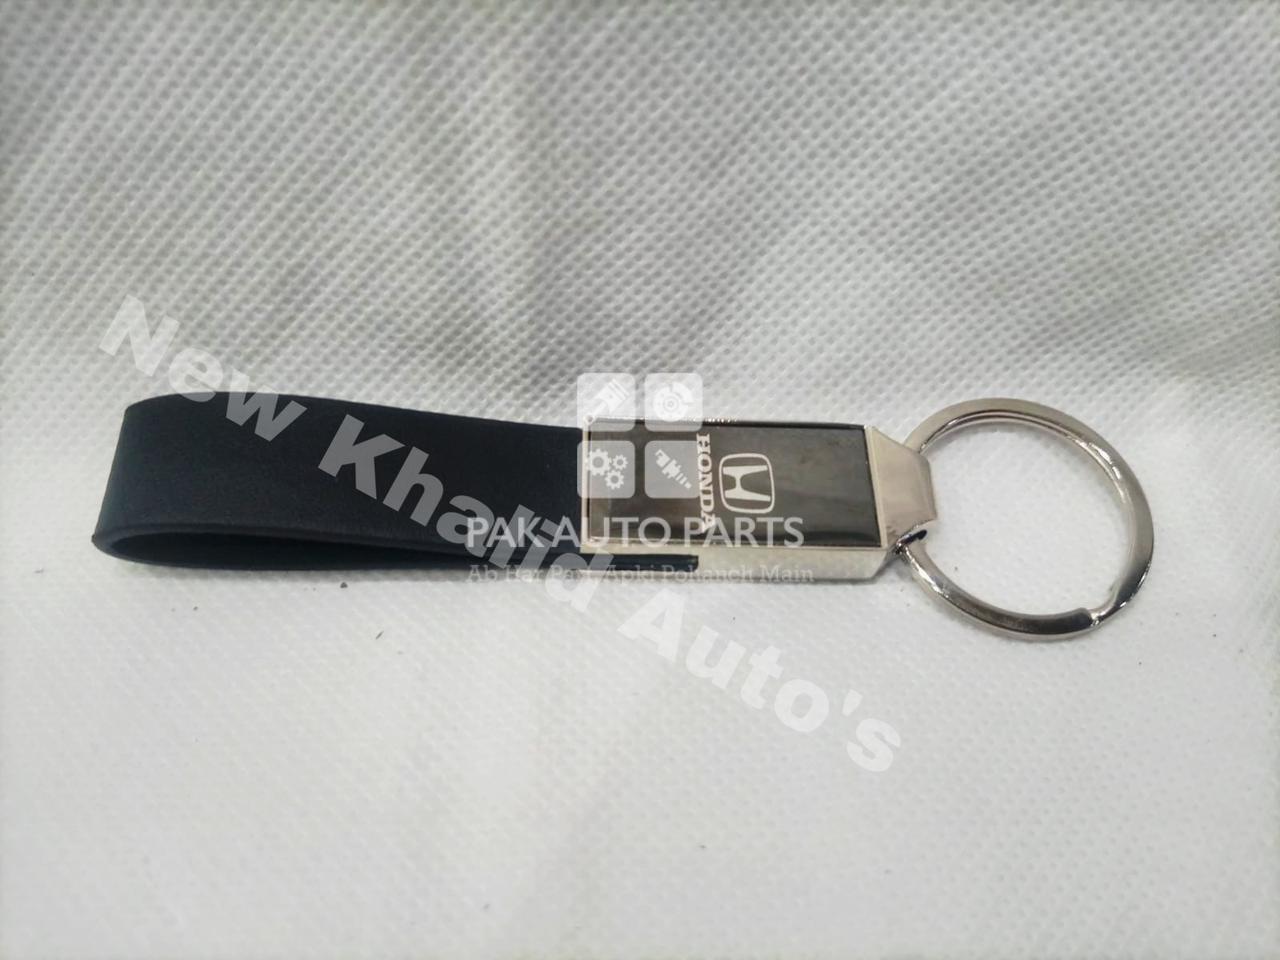 Picture of Car Key Chain With Honda Logo